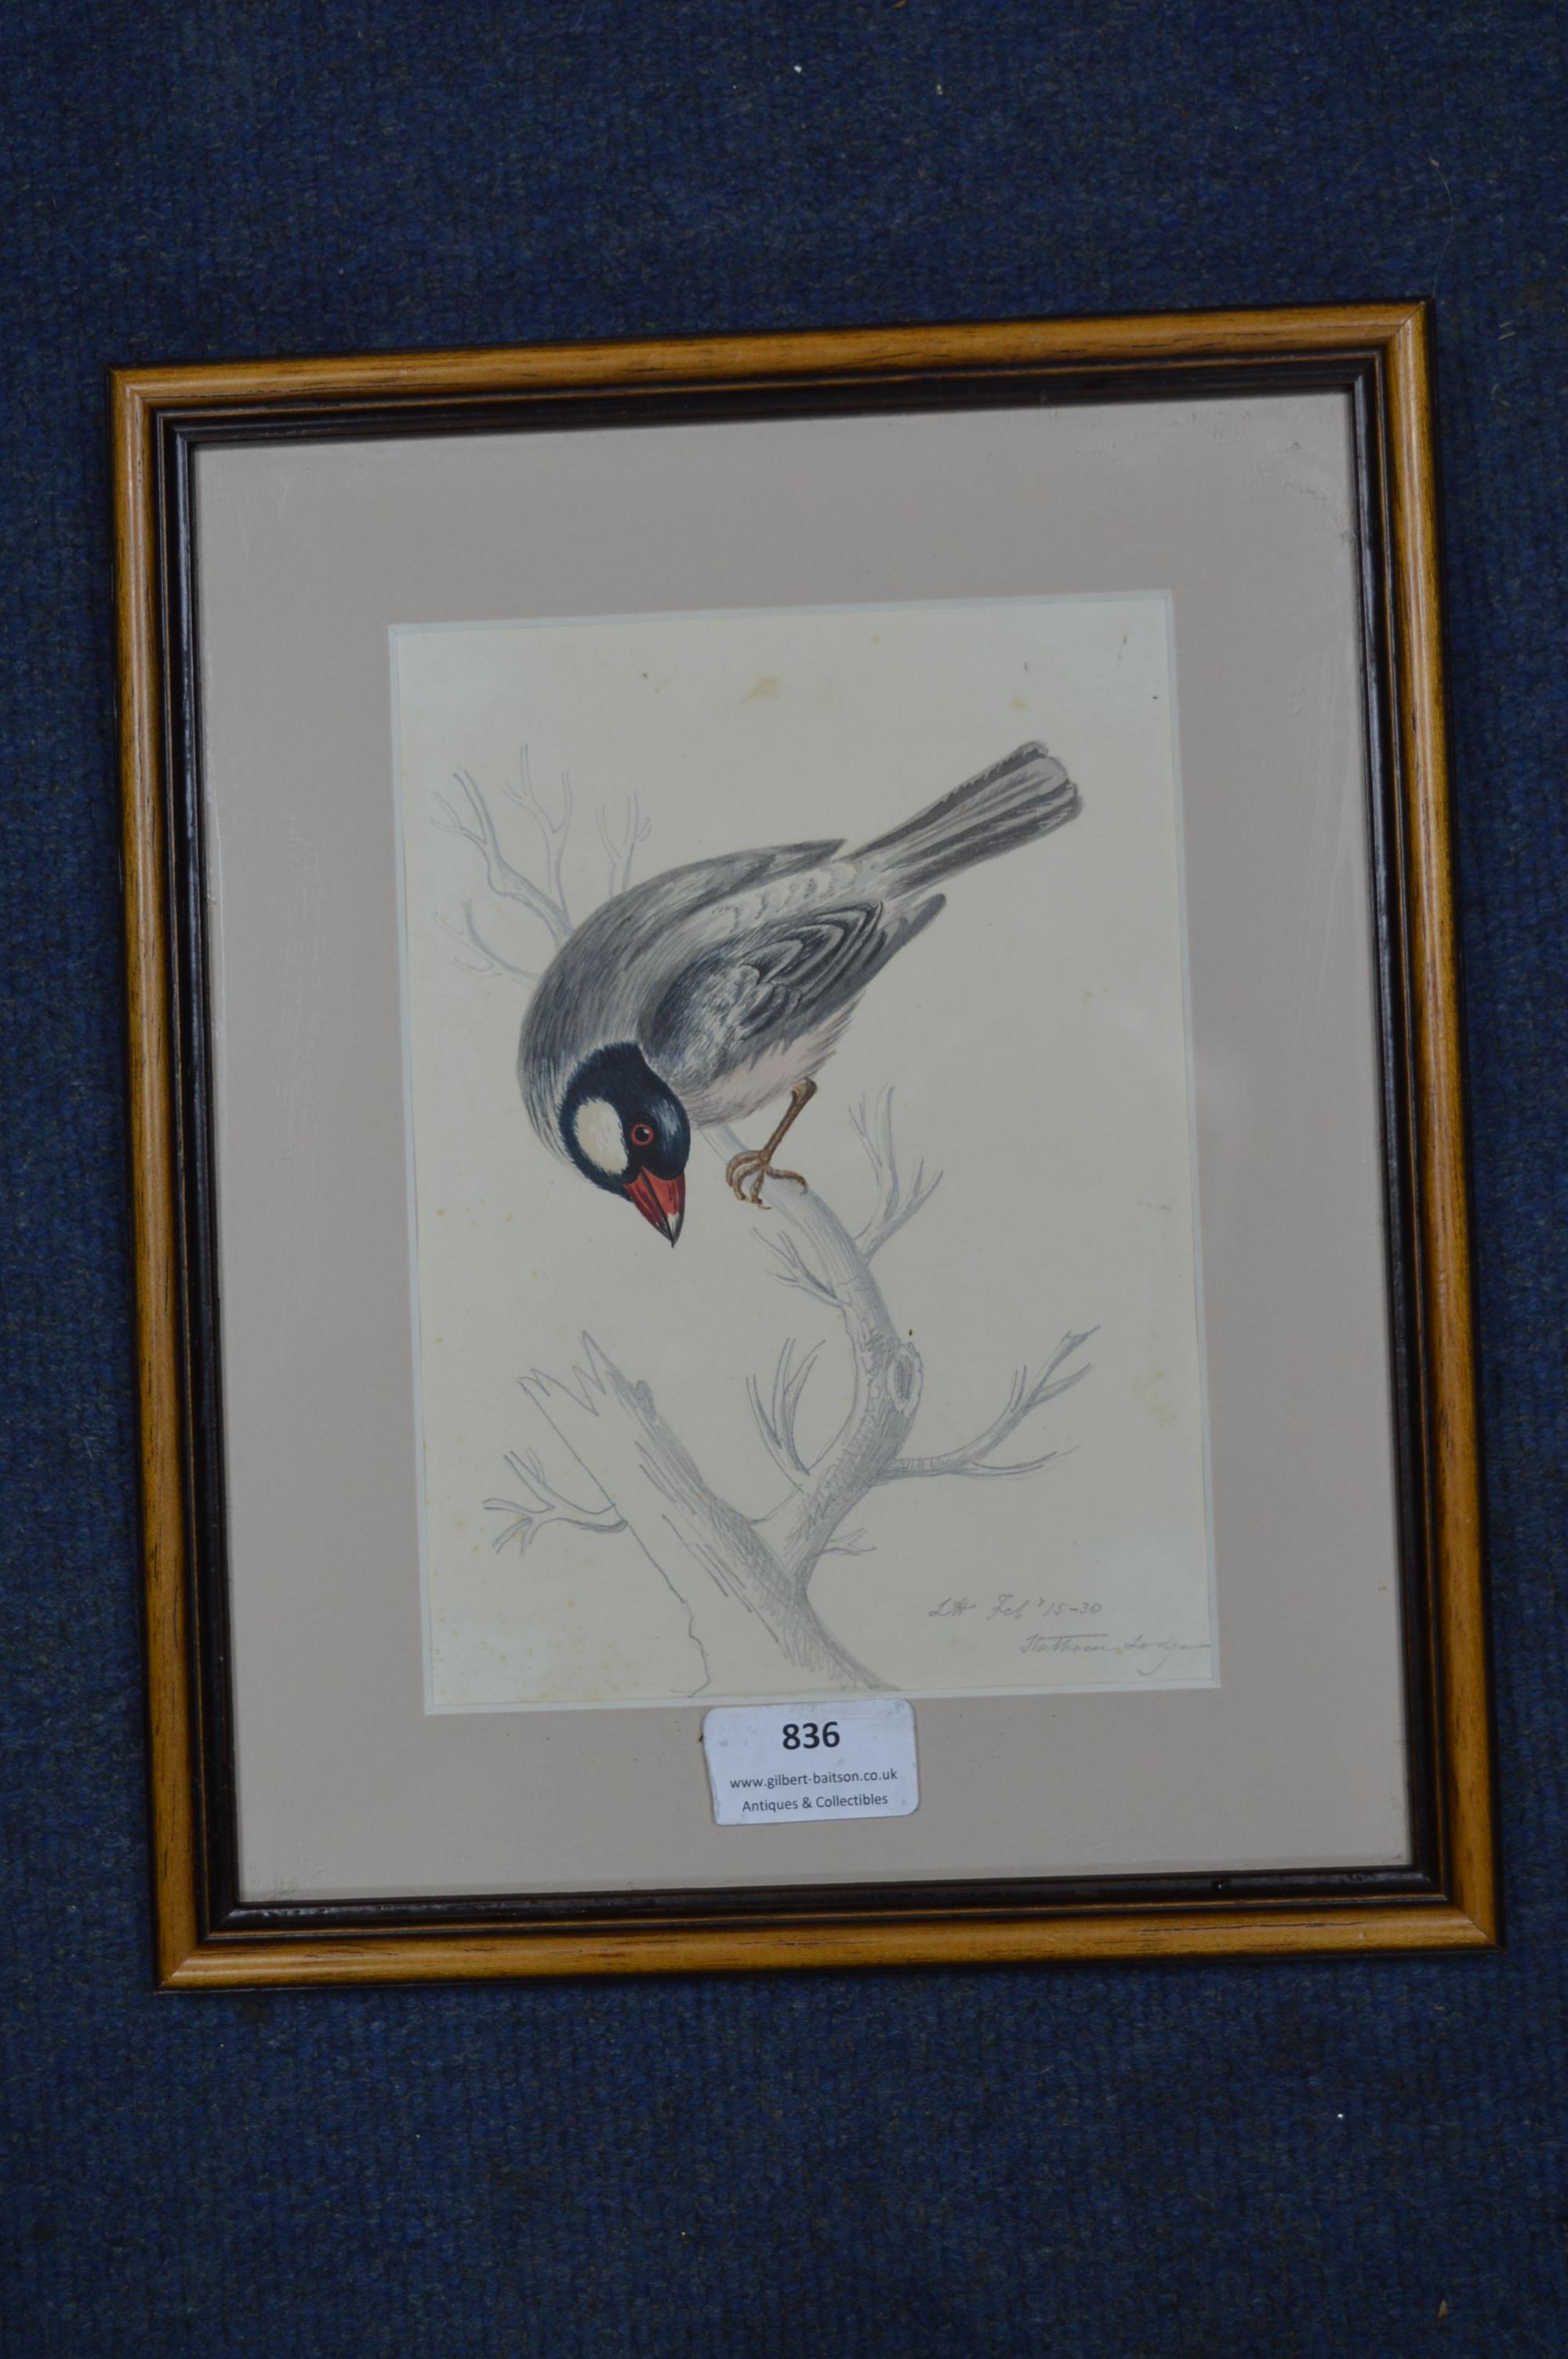 Pencil and Watercolour Sketch of a Bird by Louisa Holt 1830